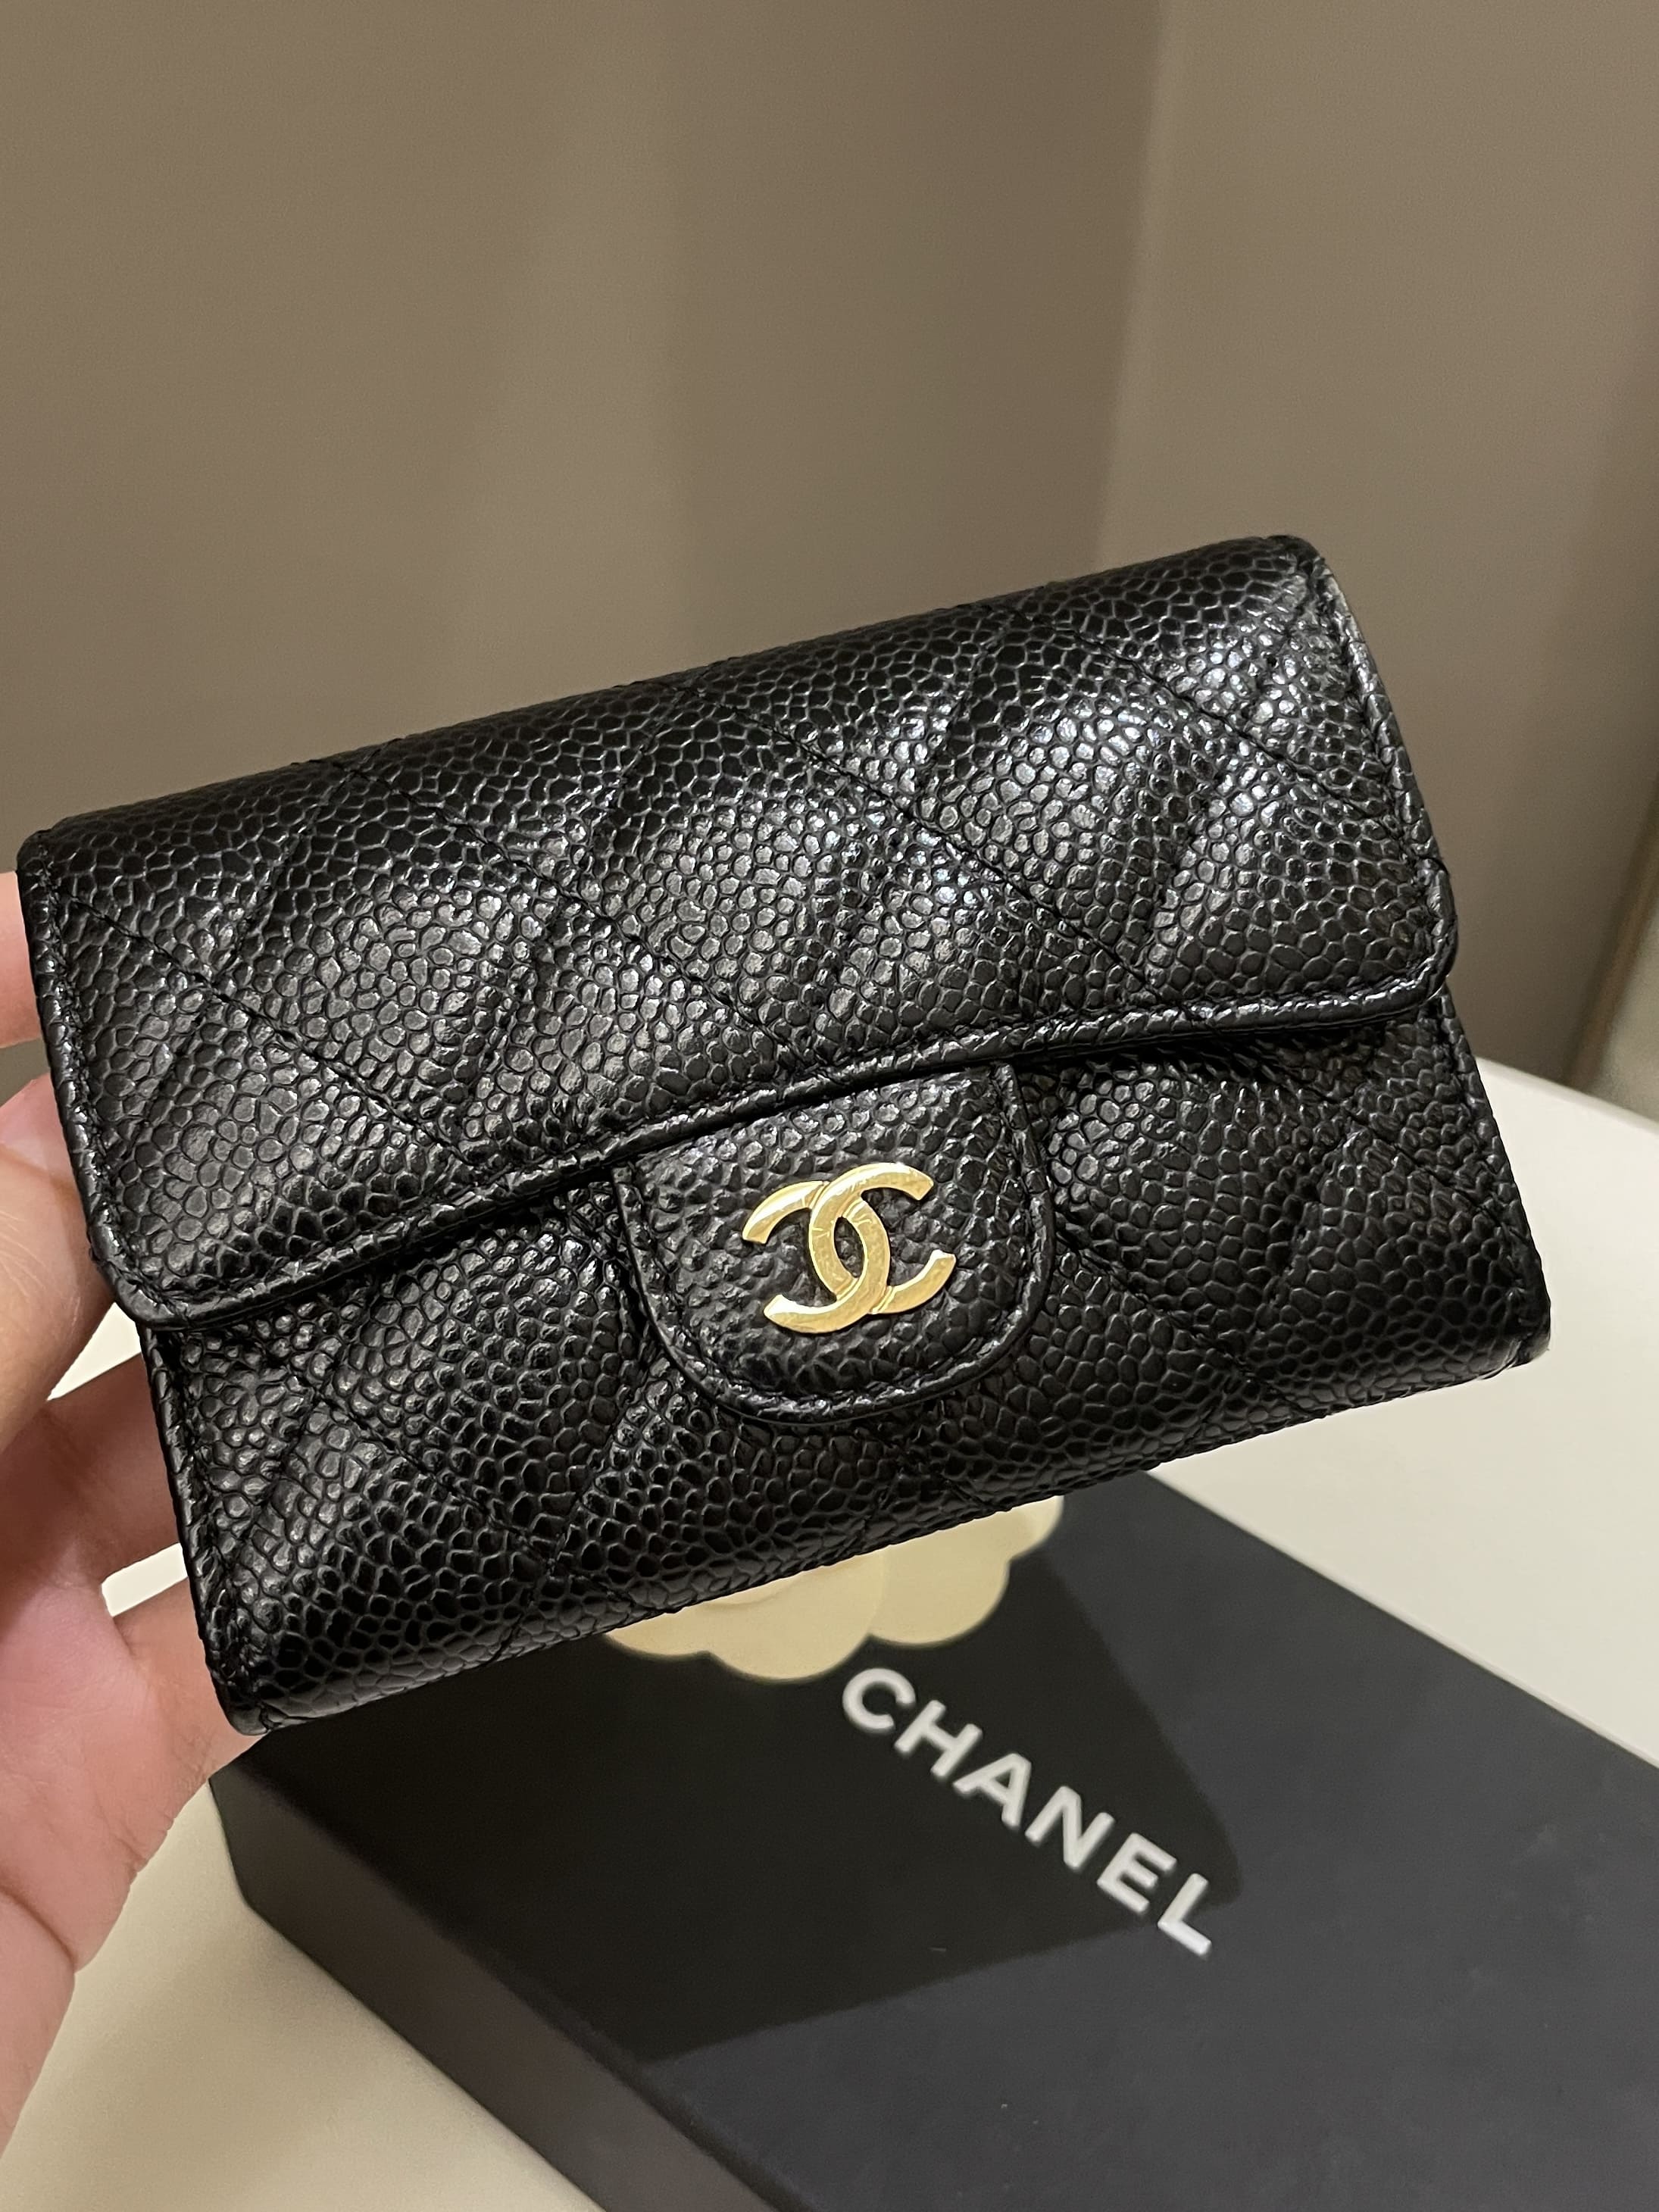 Shop chanel wallet for Sale on Shopee Philippines